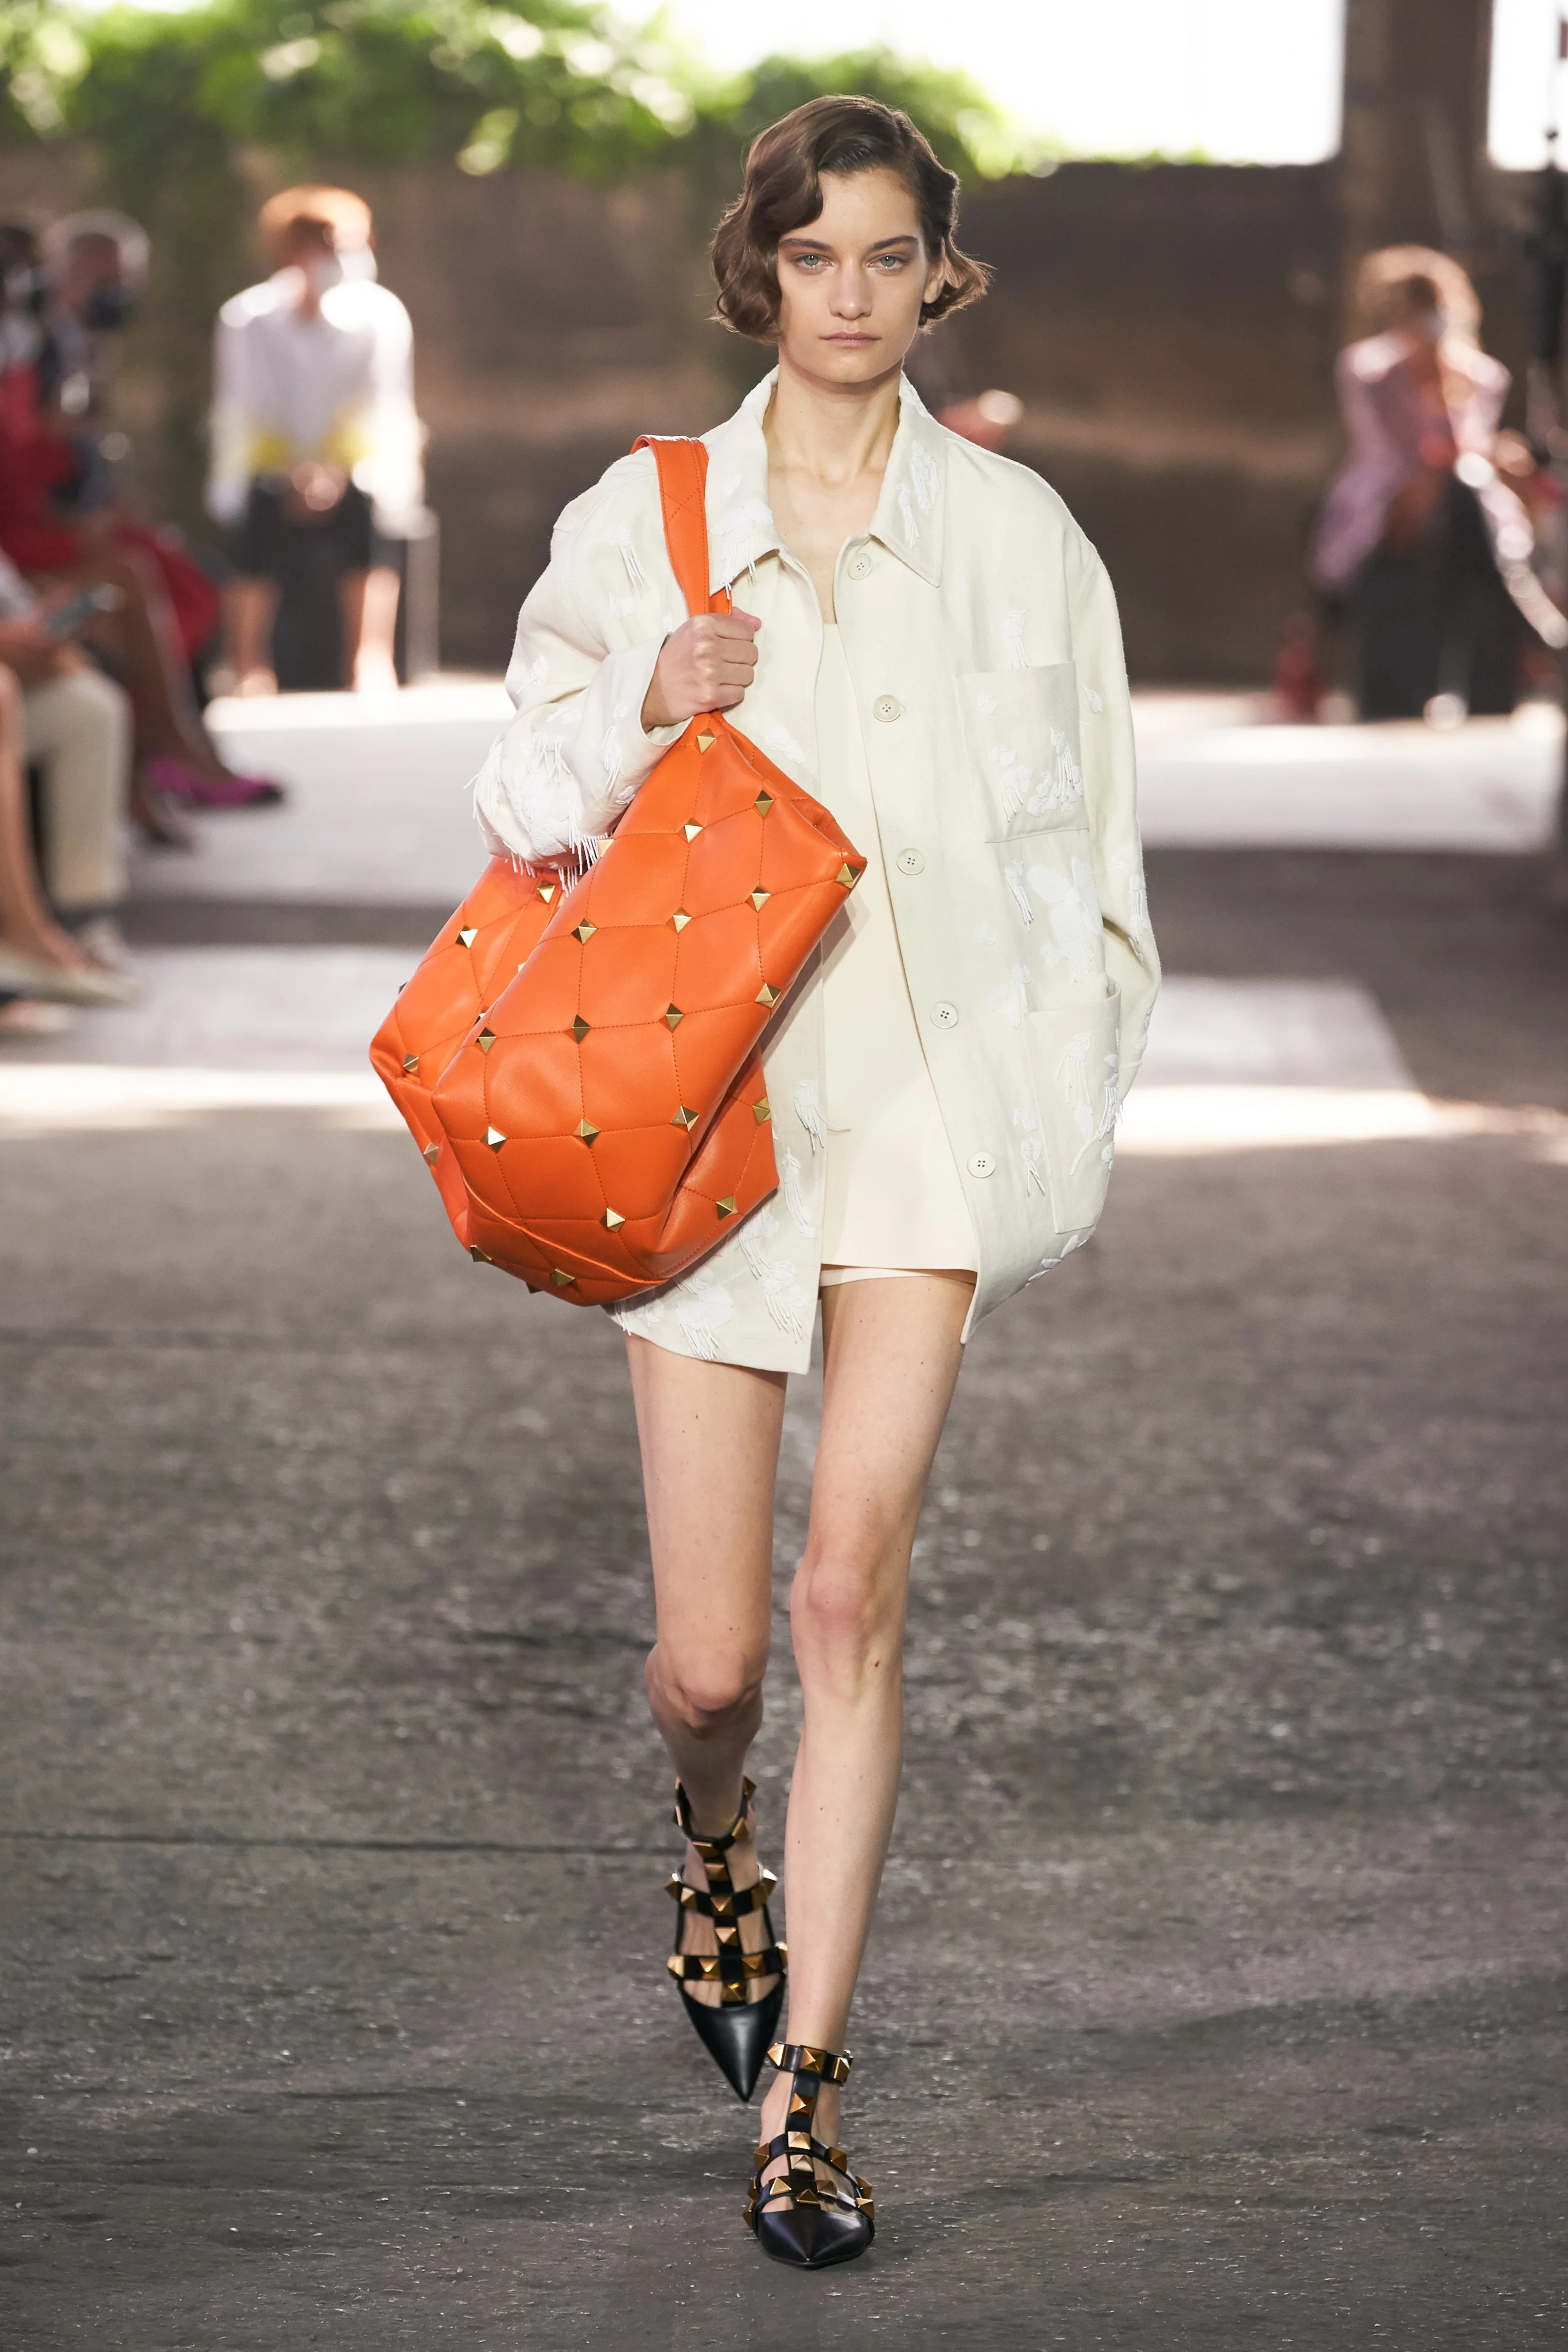 7 Designer Bag Trends That are Big in London Right Now